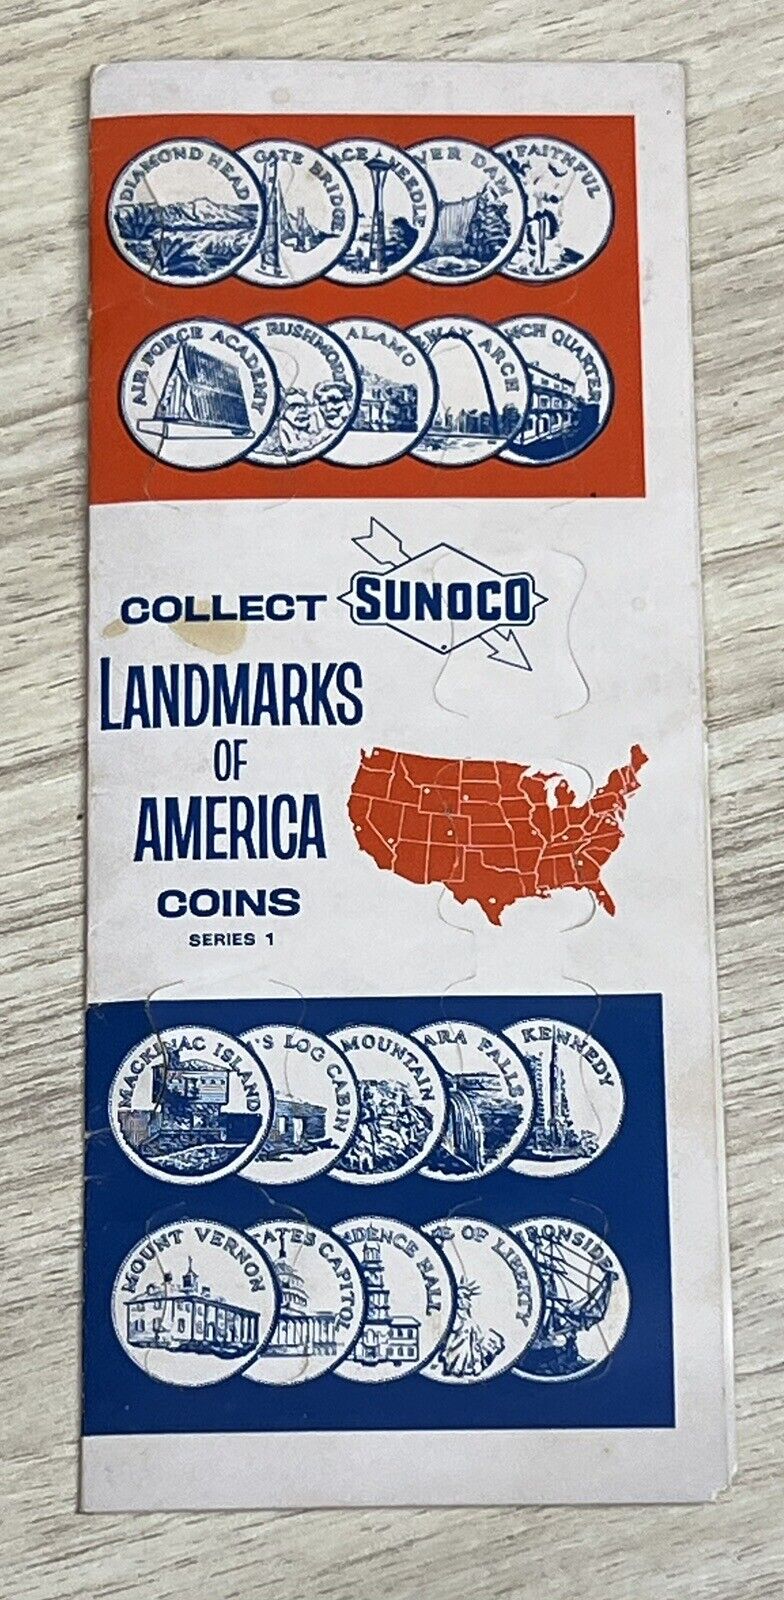 1969 Sunoco Landmarks of America Collectible Coins - UN-USED  CARD  Series 1 One